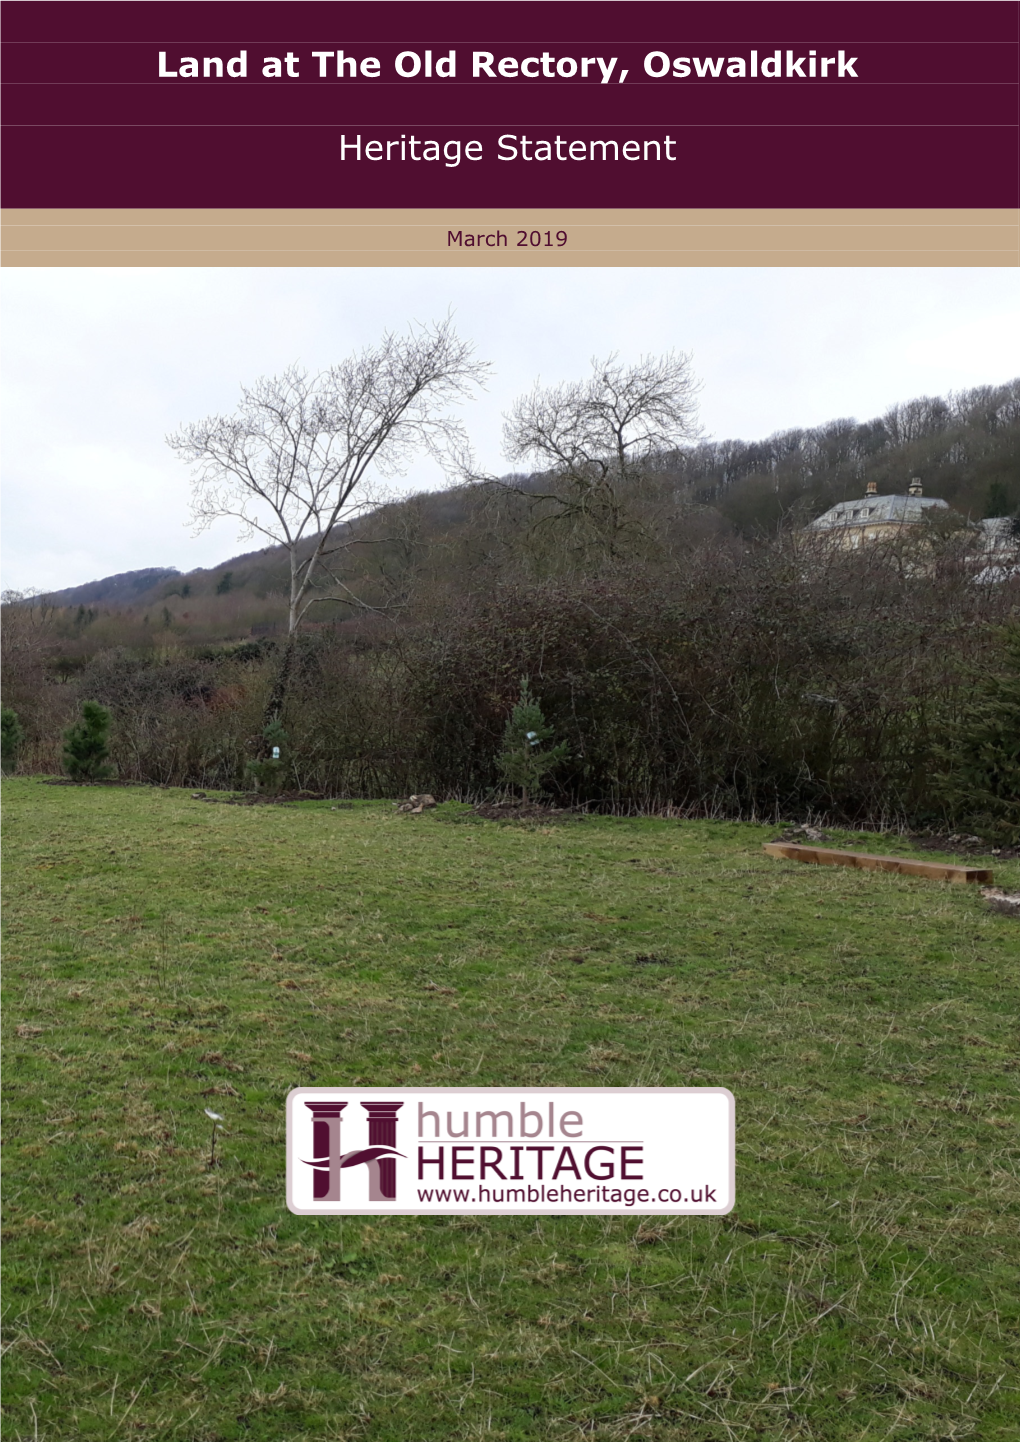 Land at the Old Rectory, Oswaldkirk Heritage Statement